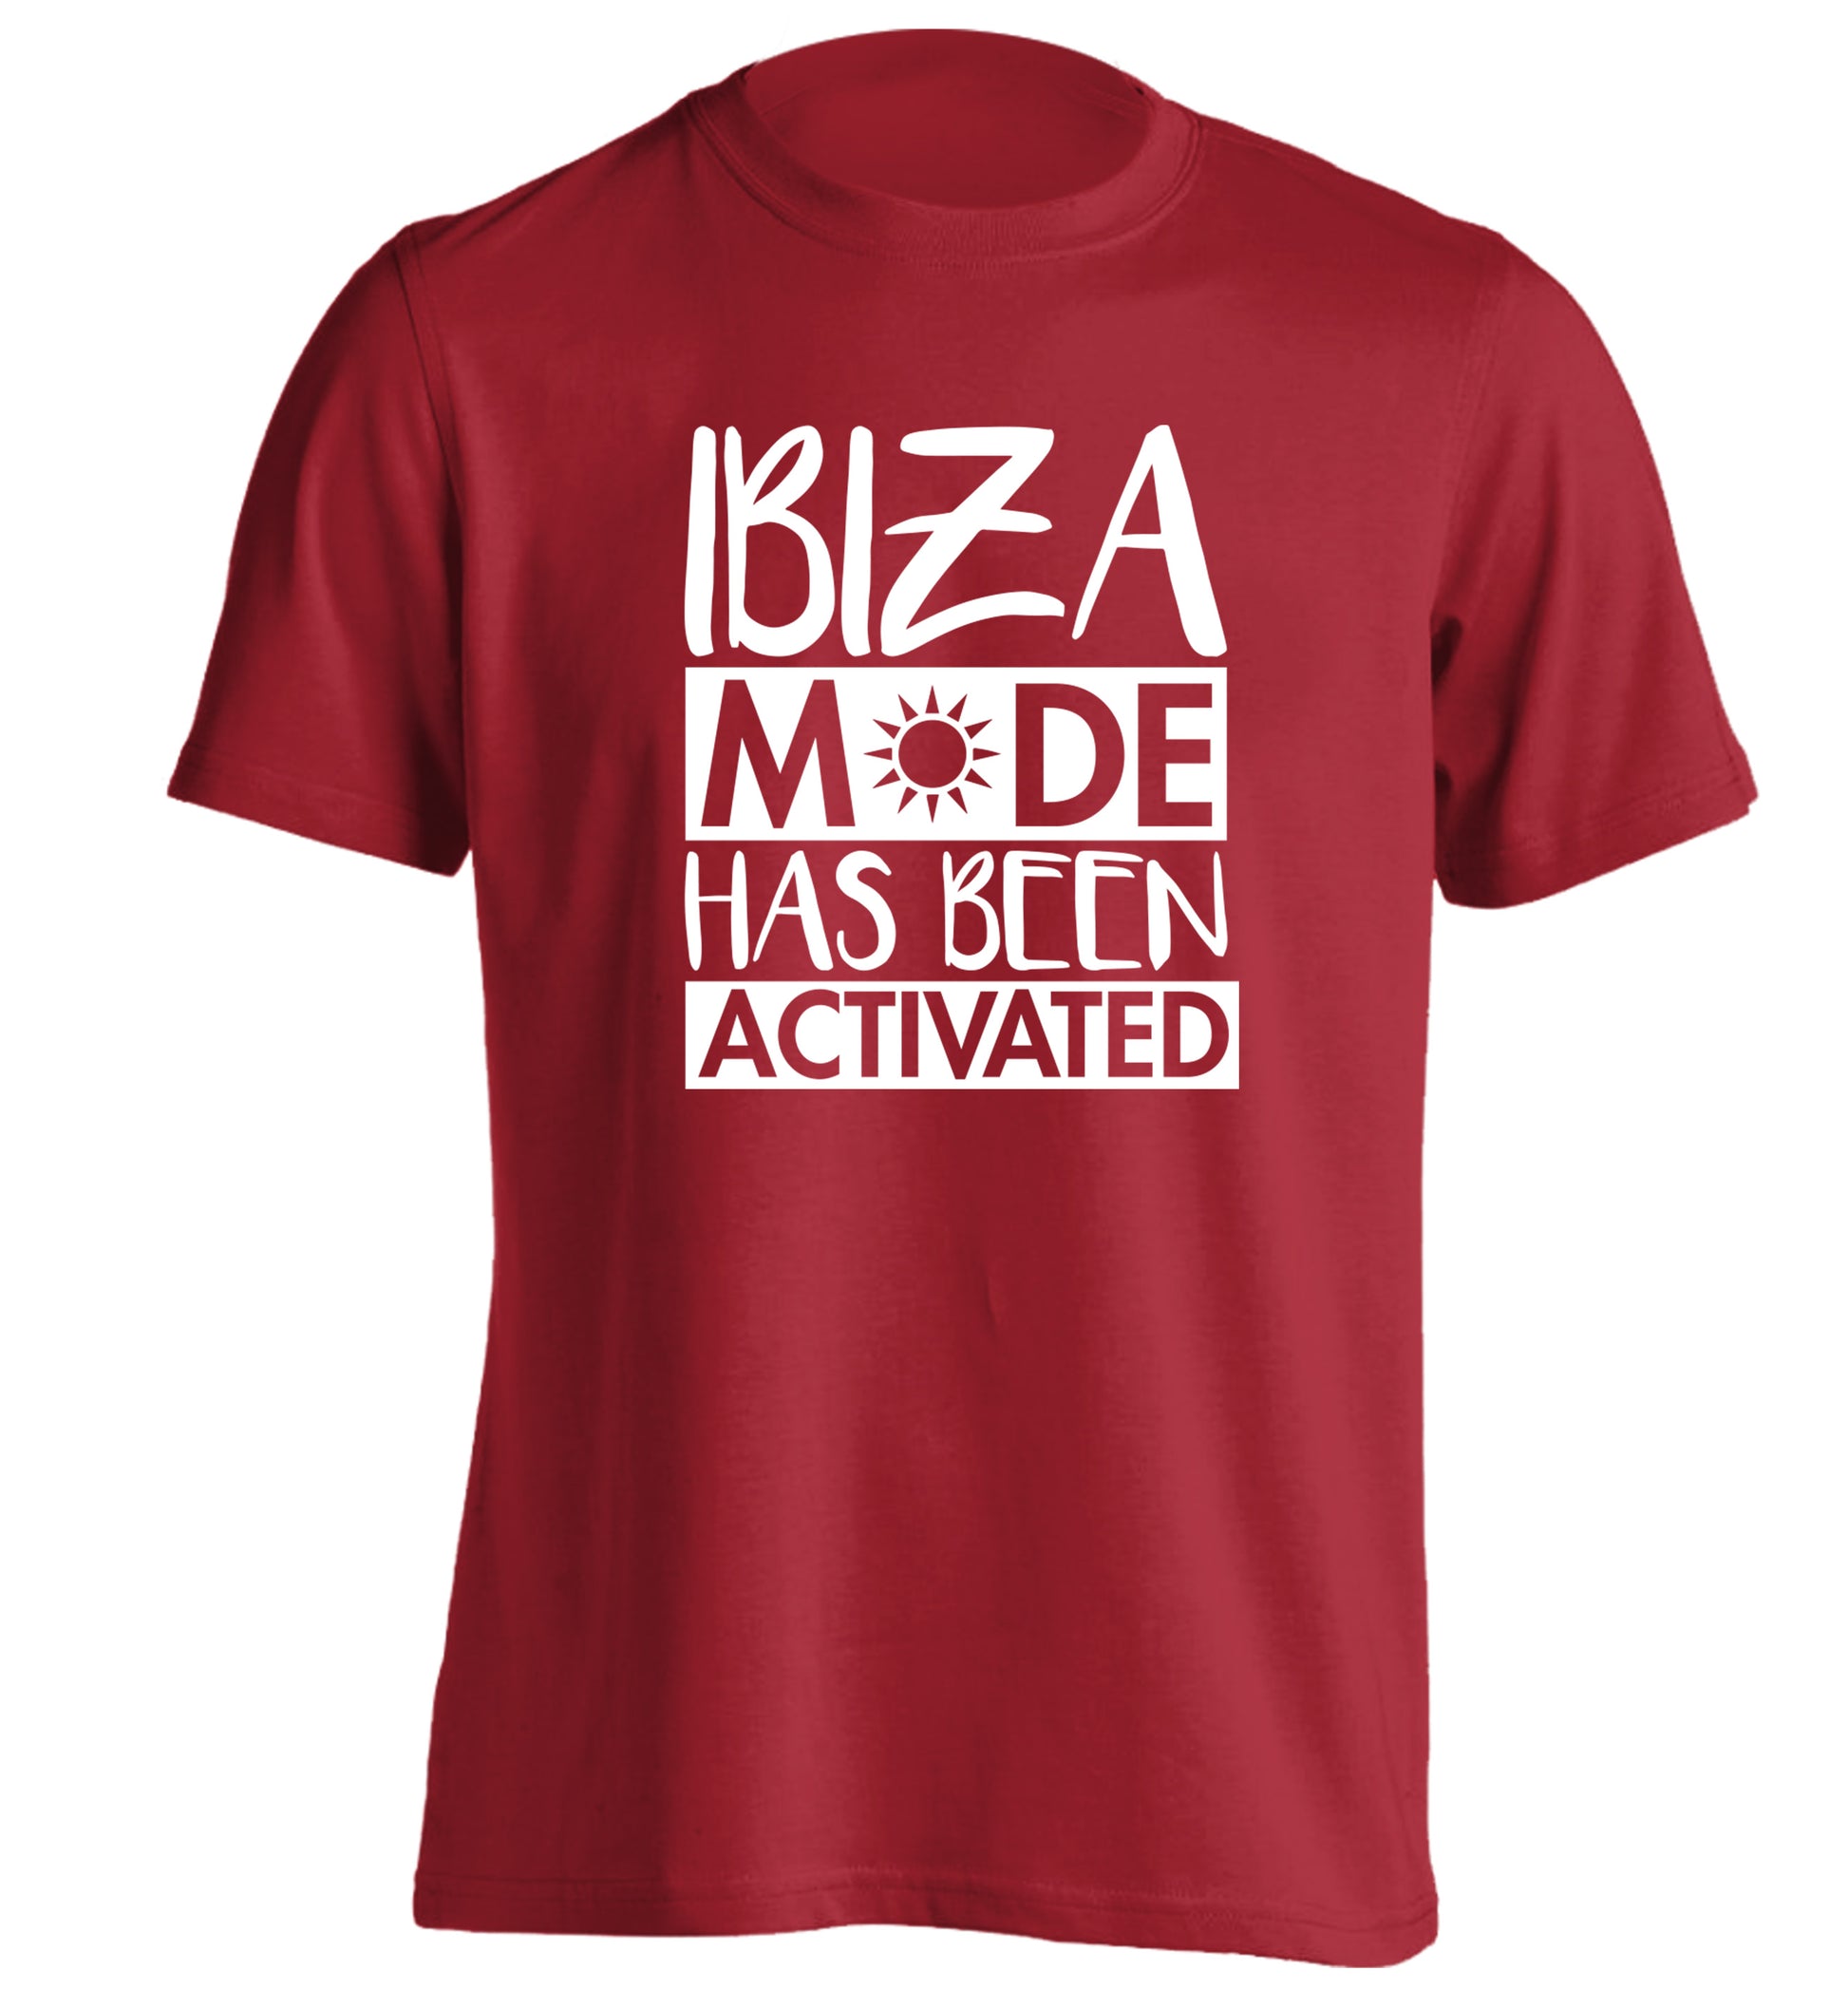 Ibiza mode has been activated adults unisex red Tshirt 2XL